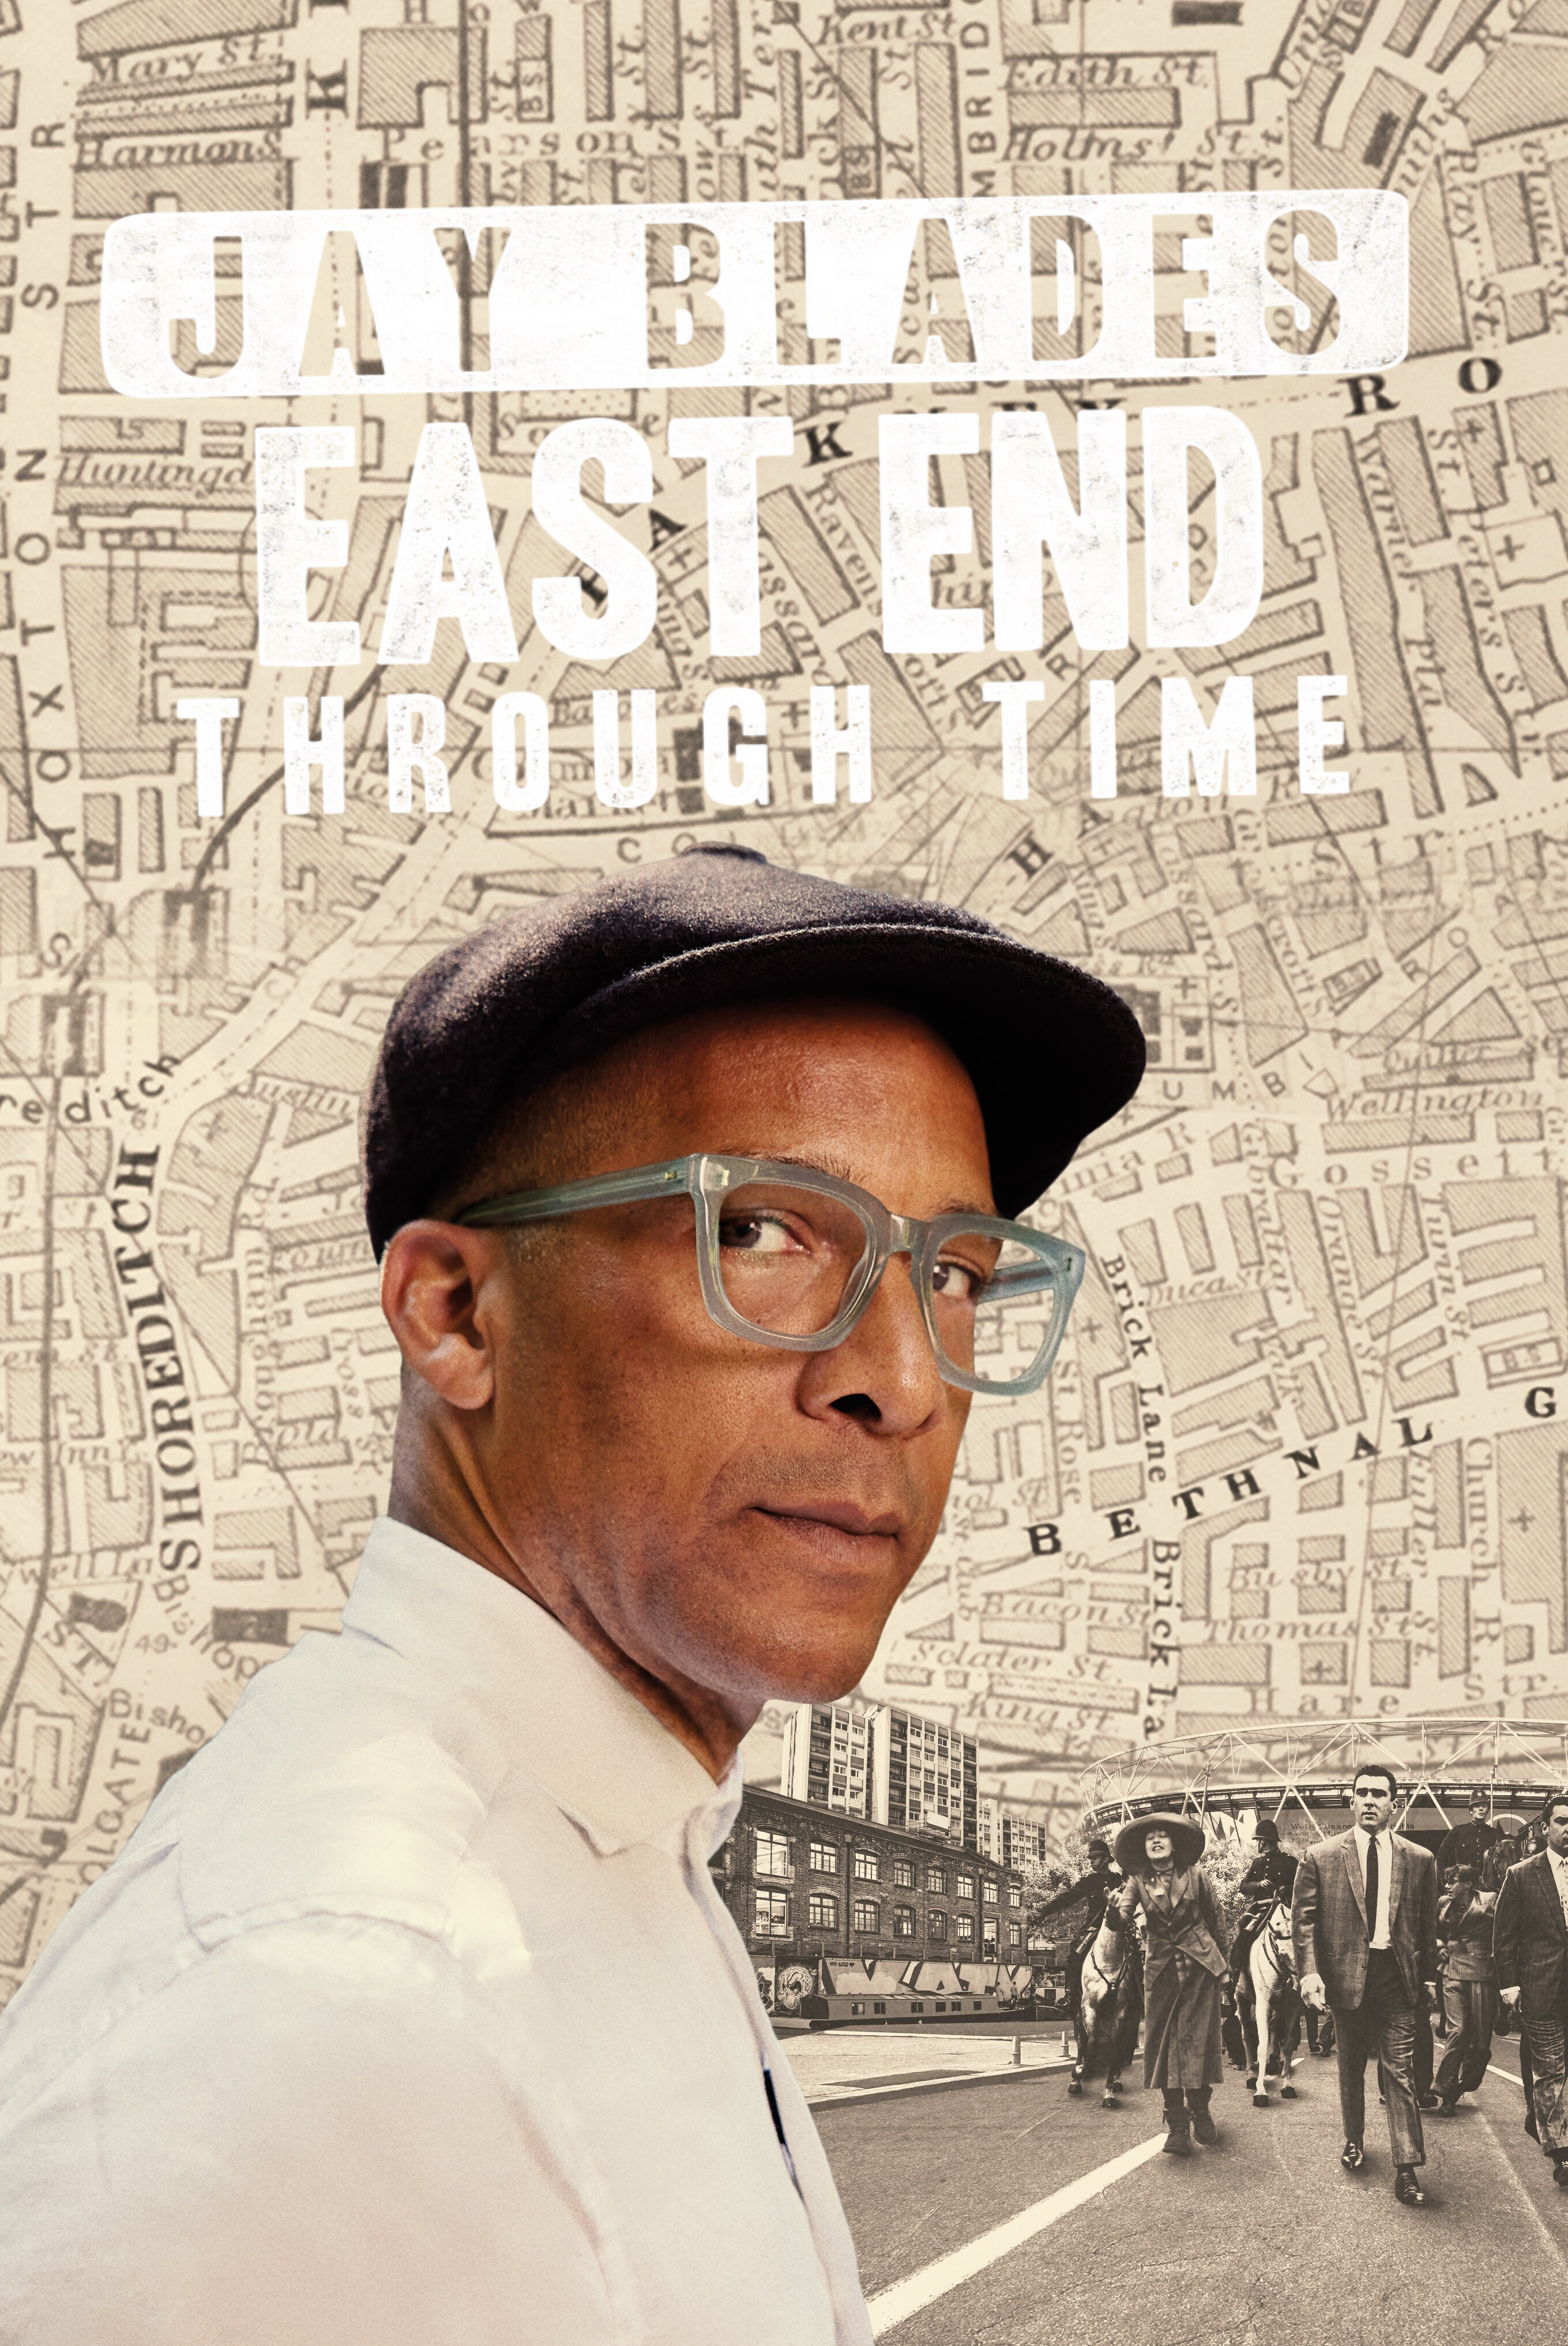 Jay Blades: East End Through Time